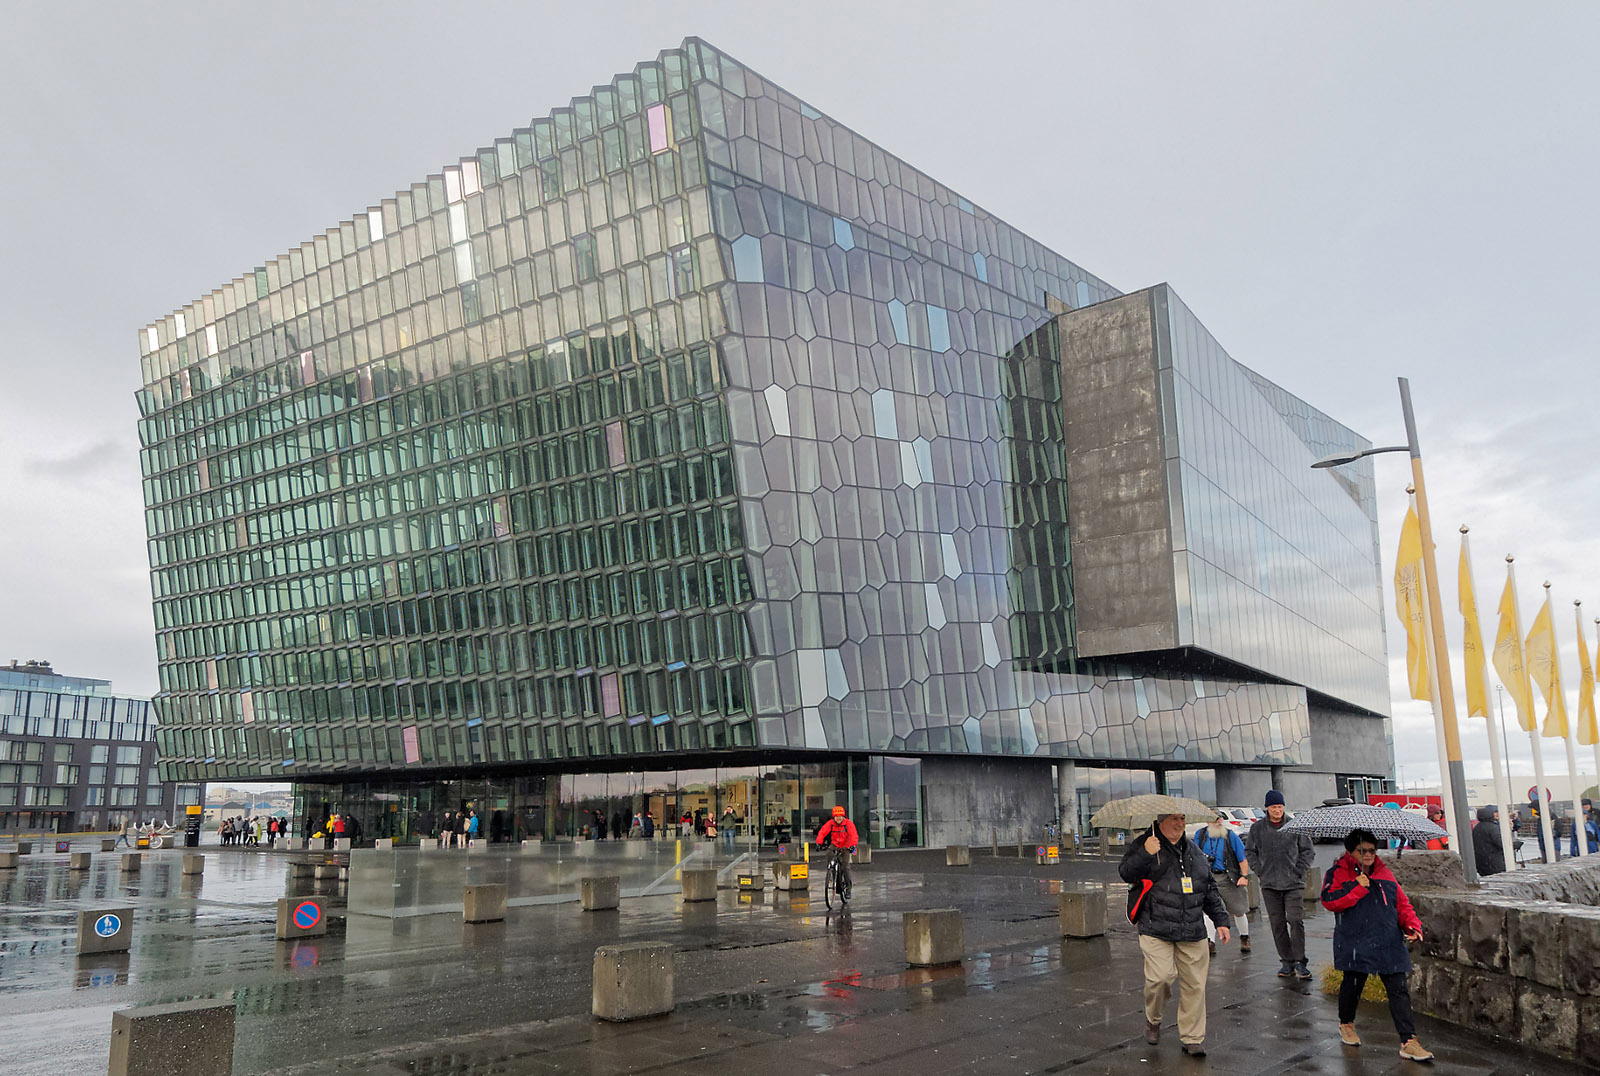 Harpa Reykjavik Concert Hall and Conference Center and tourists.   Only tourists carry umbrellas in Iceland (Think what happens to umbrellas in regularly occurring wind gusts of 30-40 mph!).